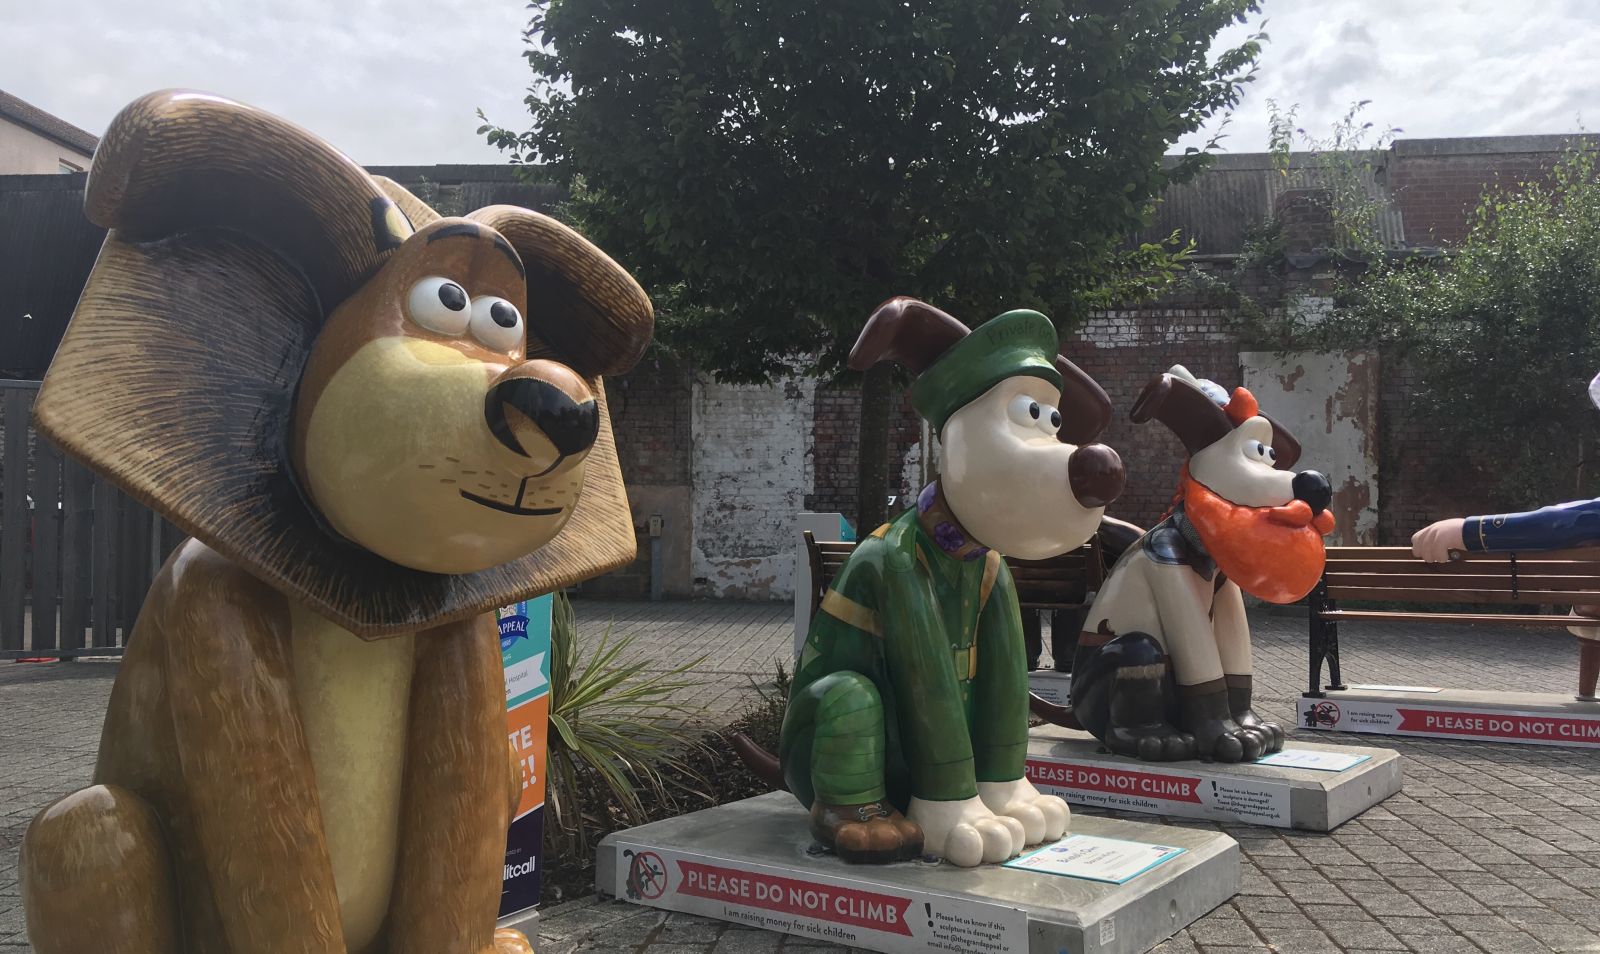 Three Gromit sculptures have been relocated to Aardman Animations' studio on Gas Ferry Road.